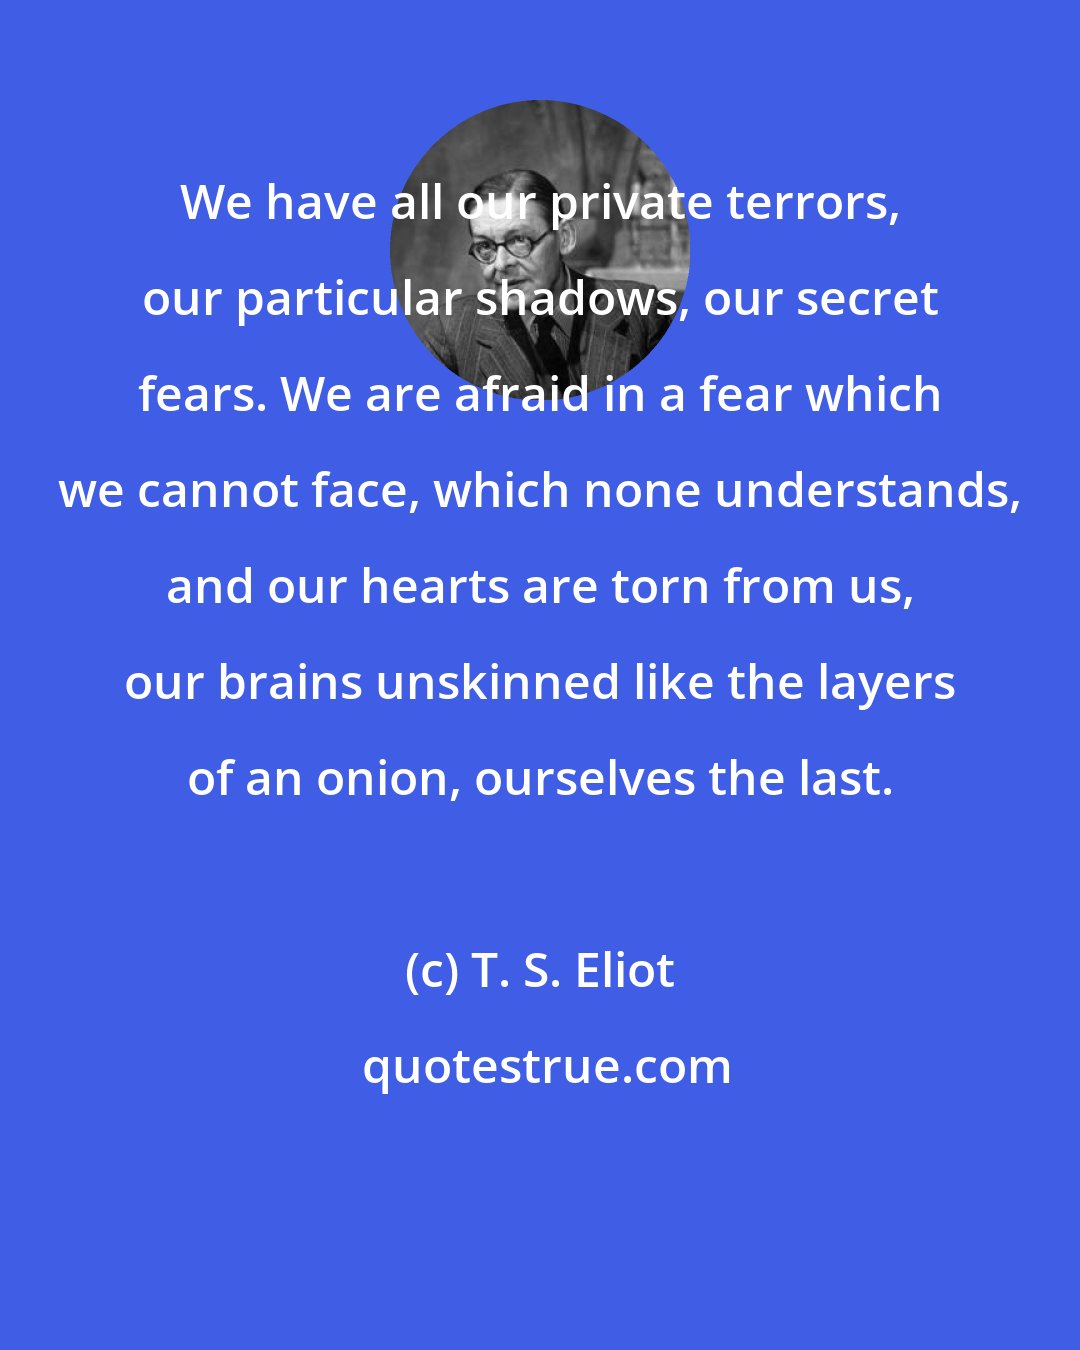 T. S. Eliot: We have all our private terrors, our particular shadows, our secret fears. We are afraid in a fear which we cannot face, which none understands, and our hearts are torn from us, our brains unskinned like the layers of an onion, ourselves the last.